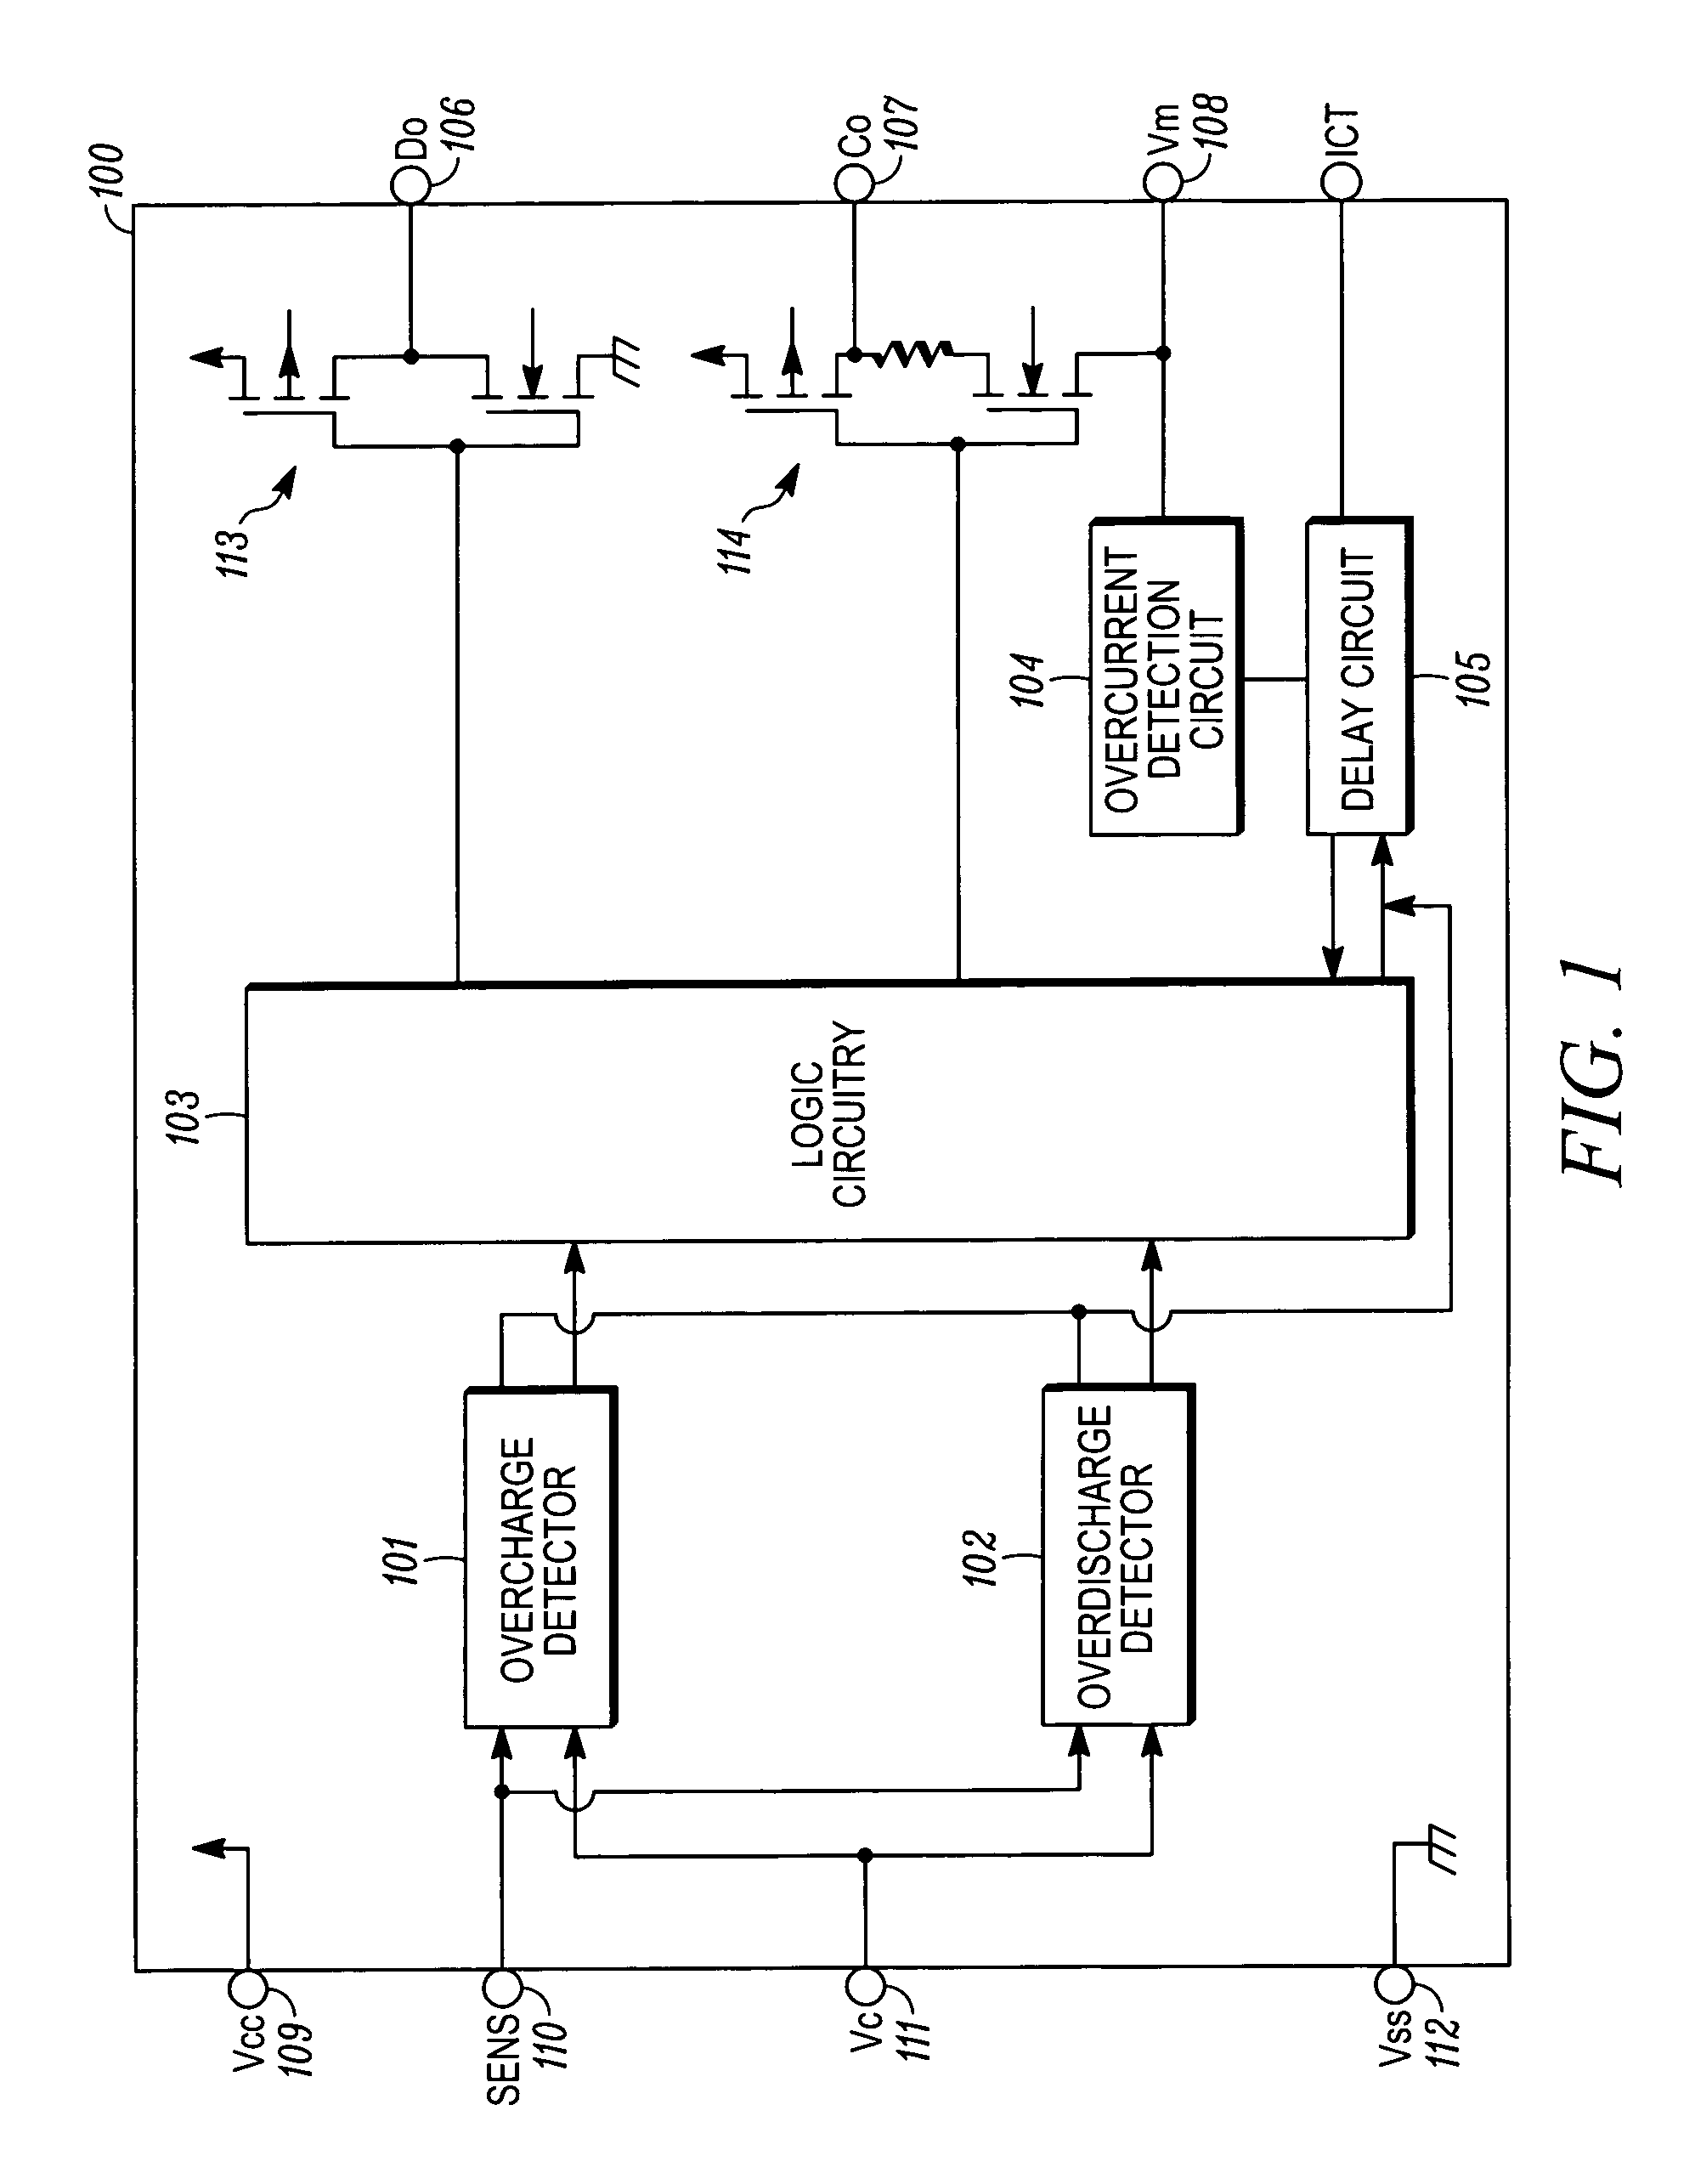 Atmospheric explosive battery protection circuit having a robust protection system